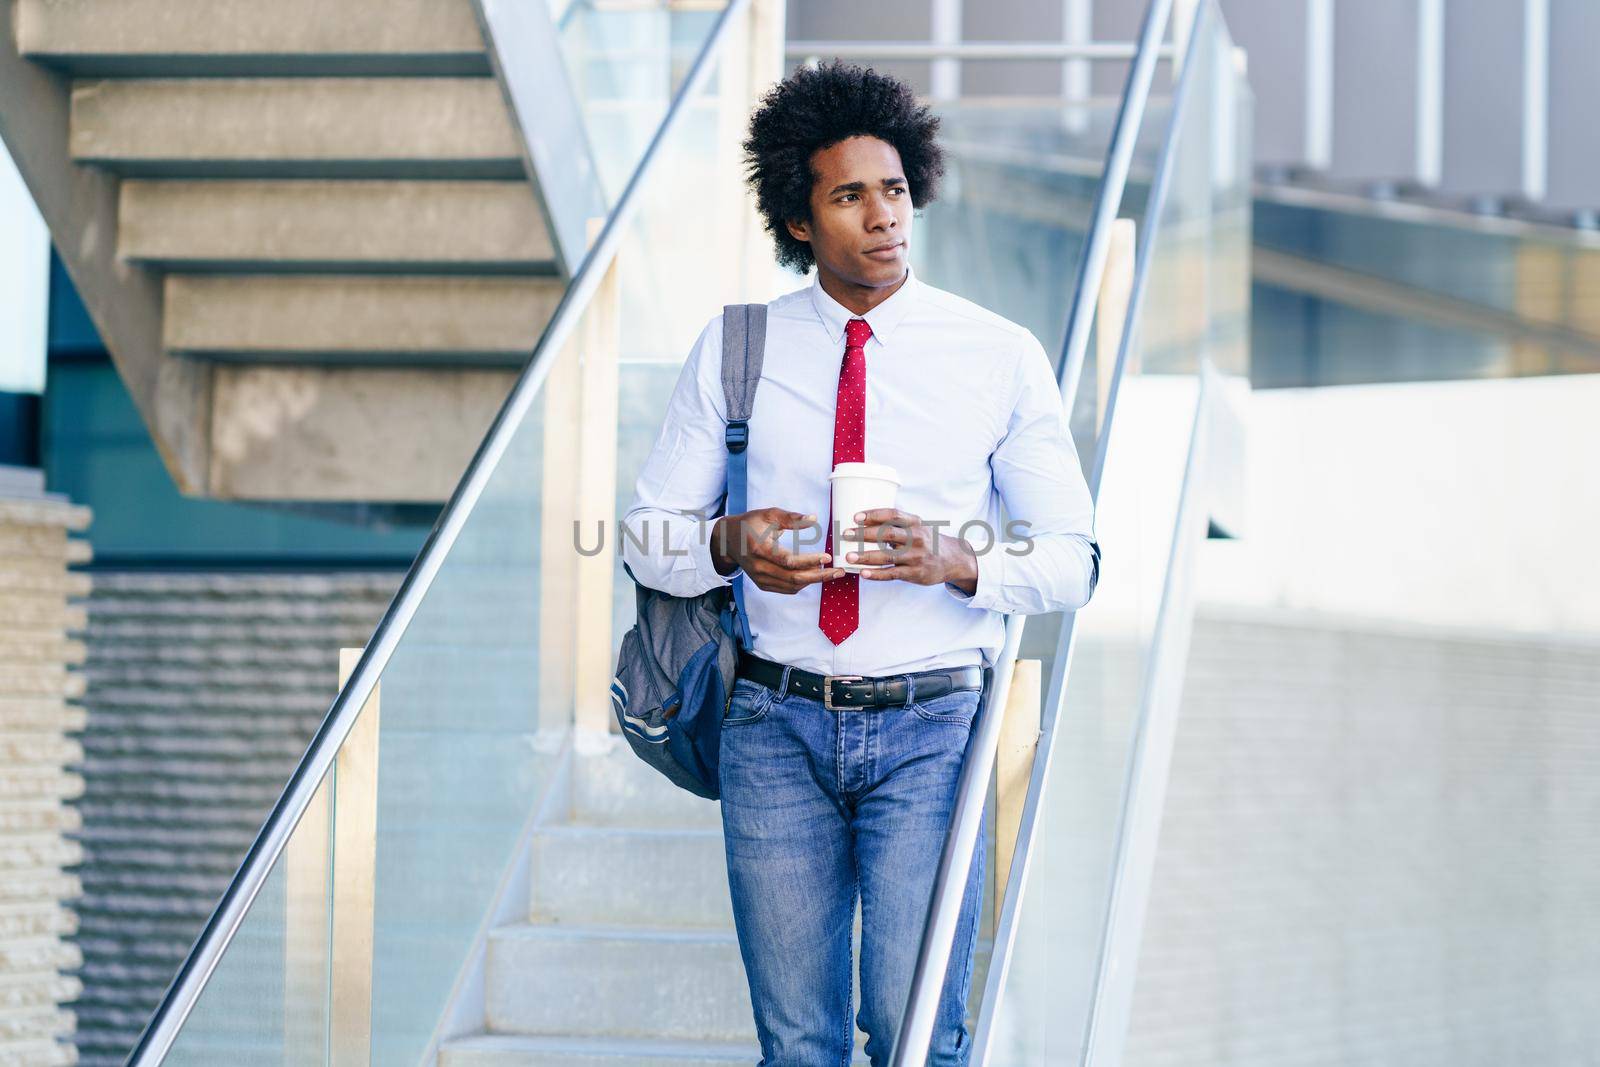 Black Businessman taking a coffee break with a take-away glass. Man with afro hair.